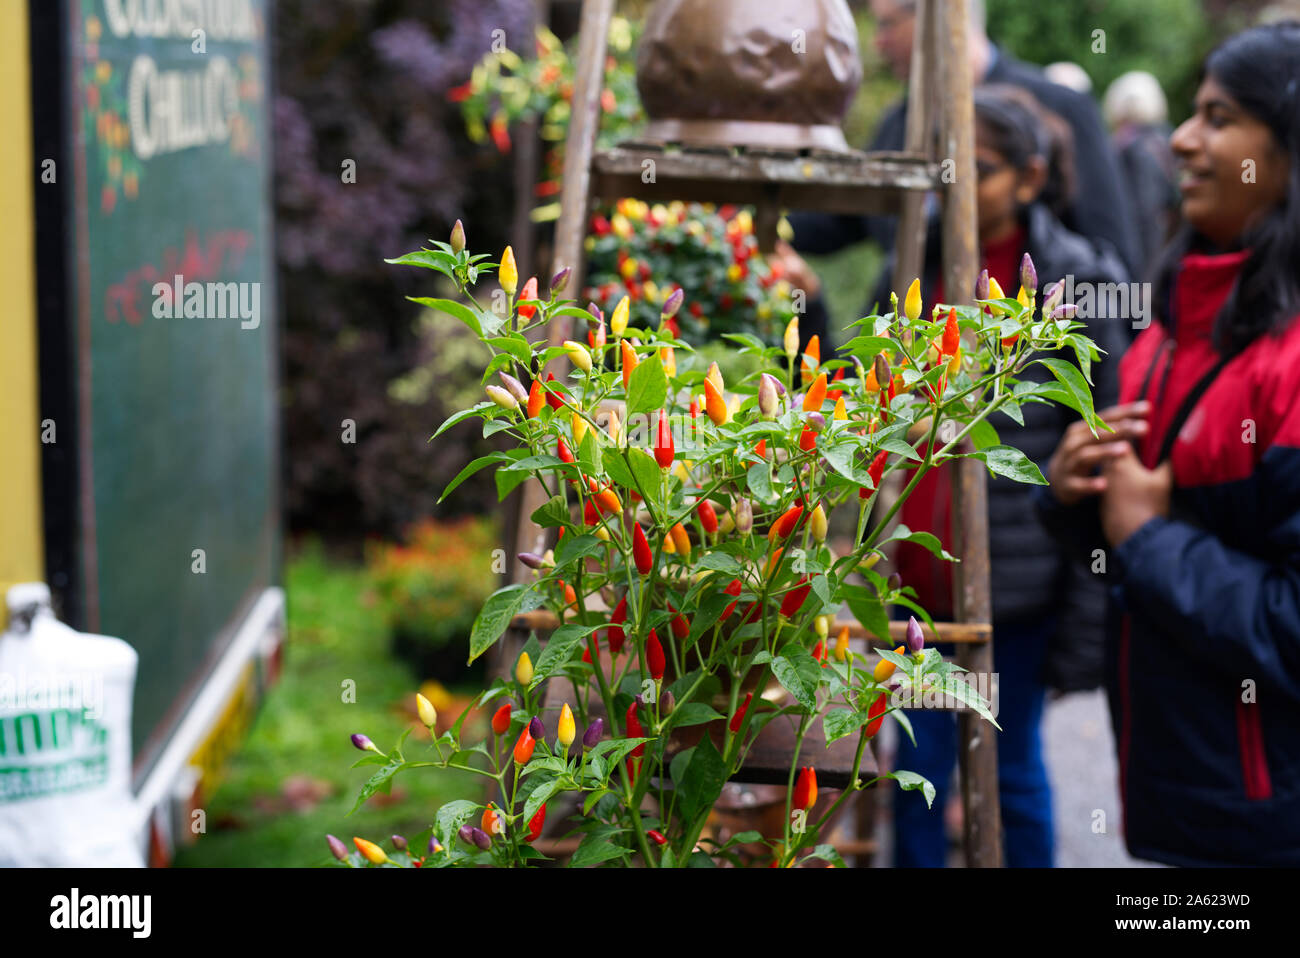 Culmstock Chilli Co's displaying a Razzamatazz Chilli Plant for sale at Wells Food Festival on Bishop's Palace Grounds Stock Photo